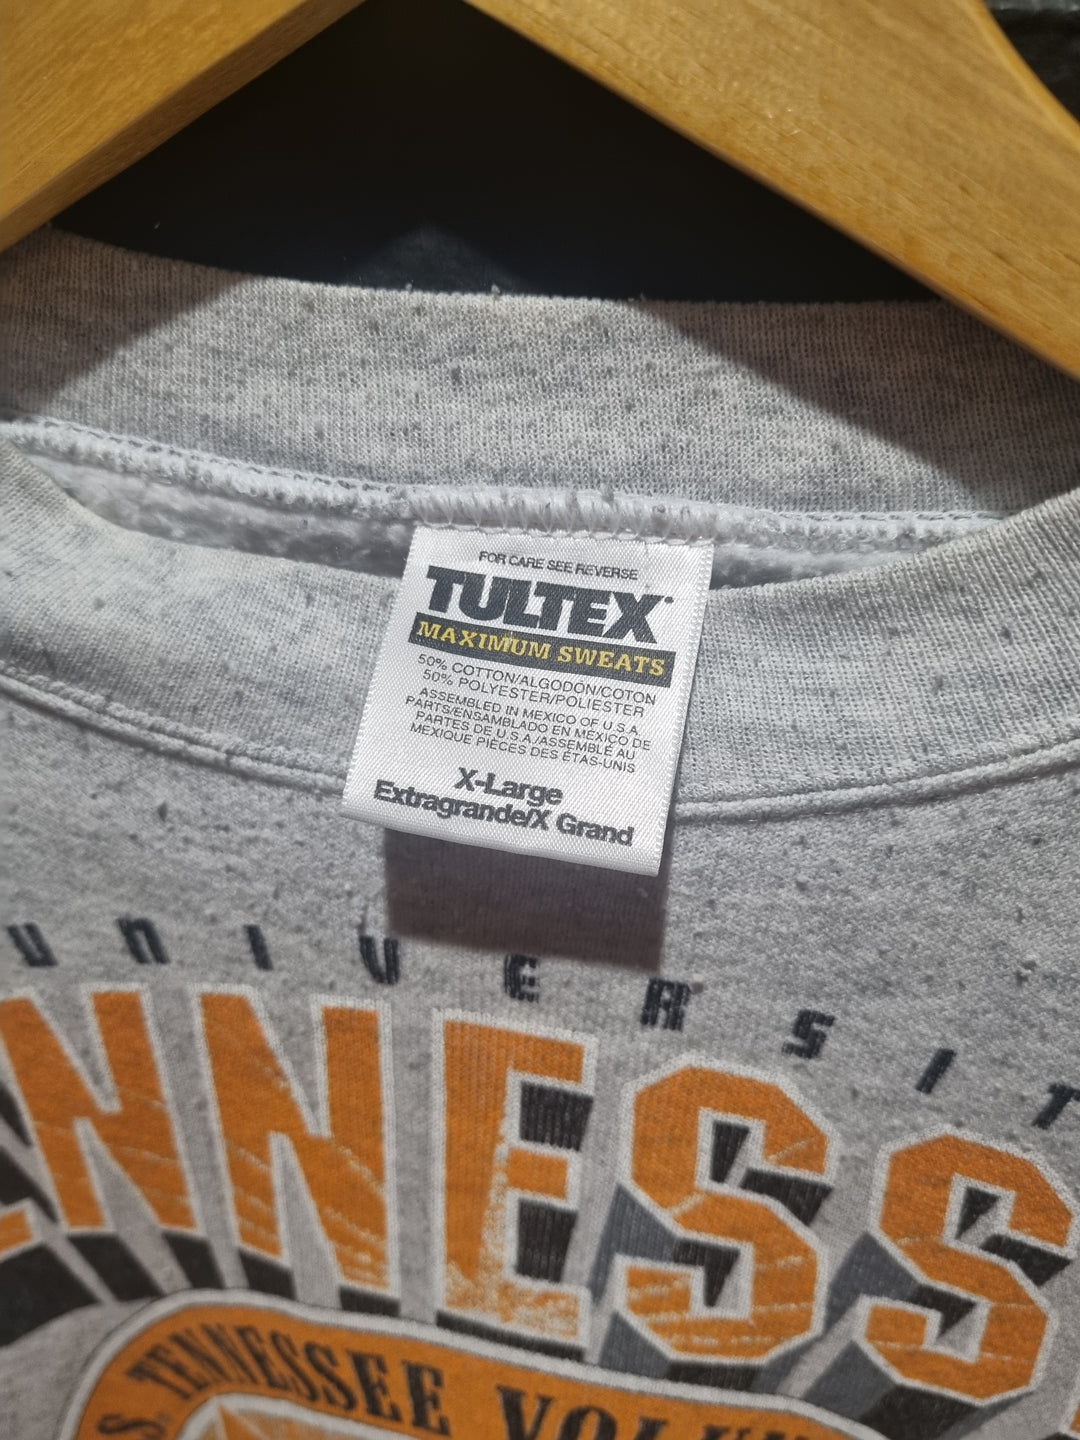 University of Tennessee Volunteers National Champions 1998 XL